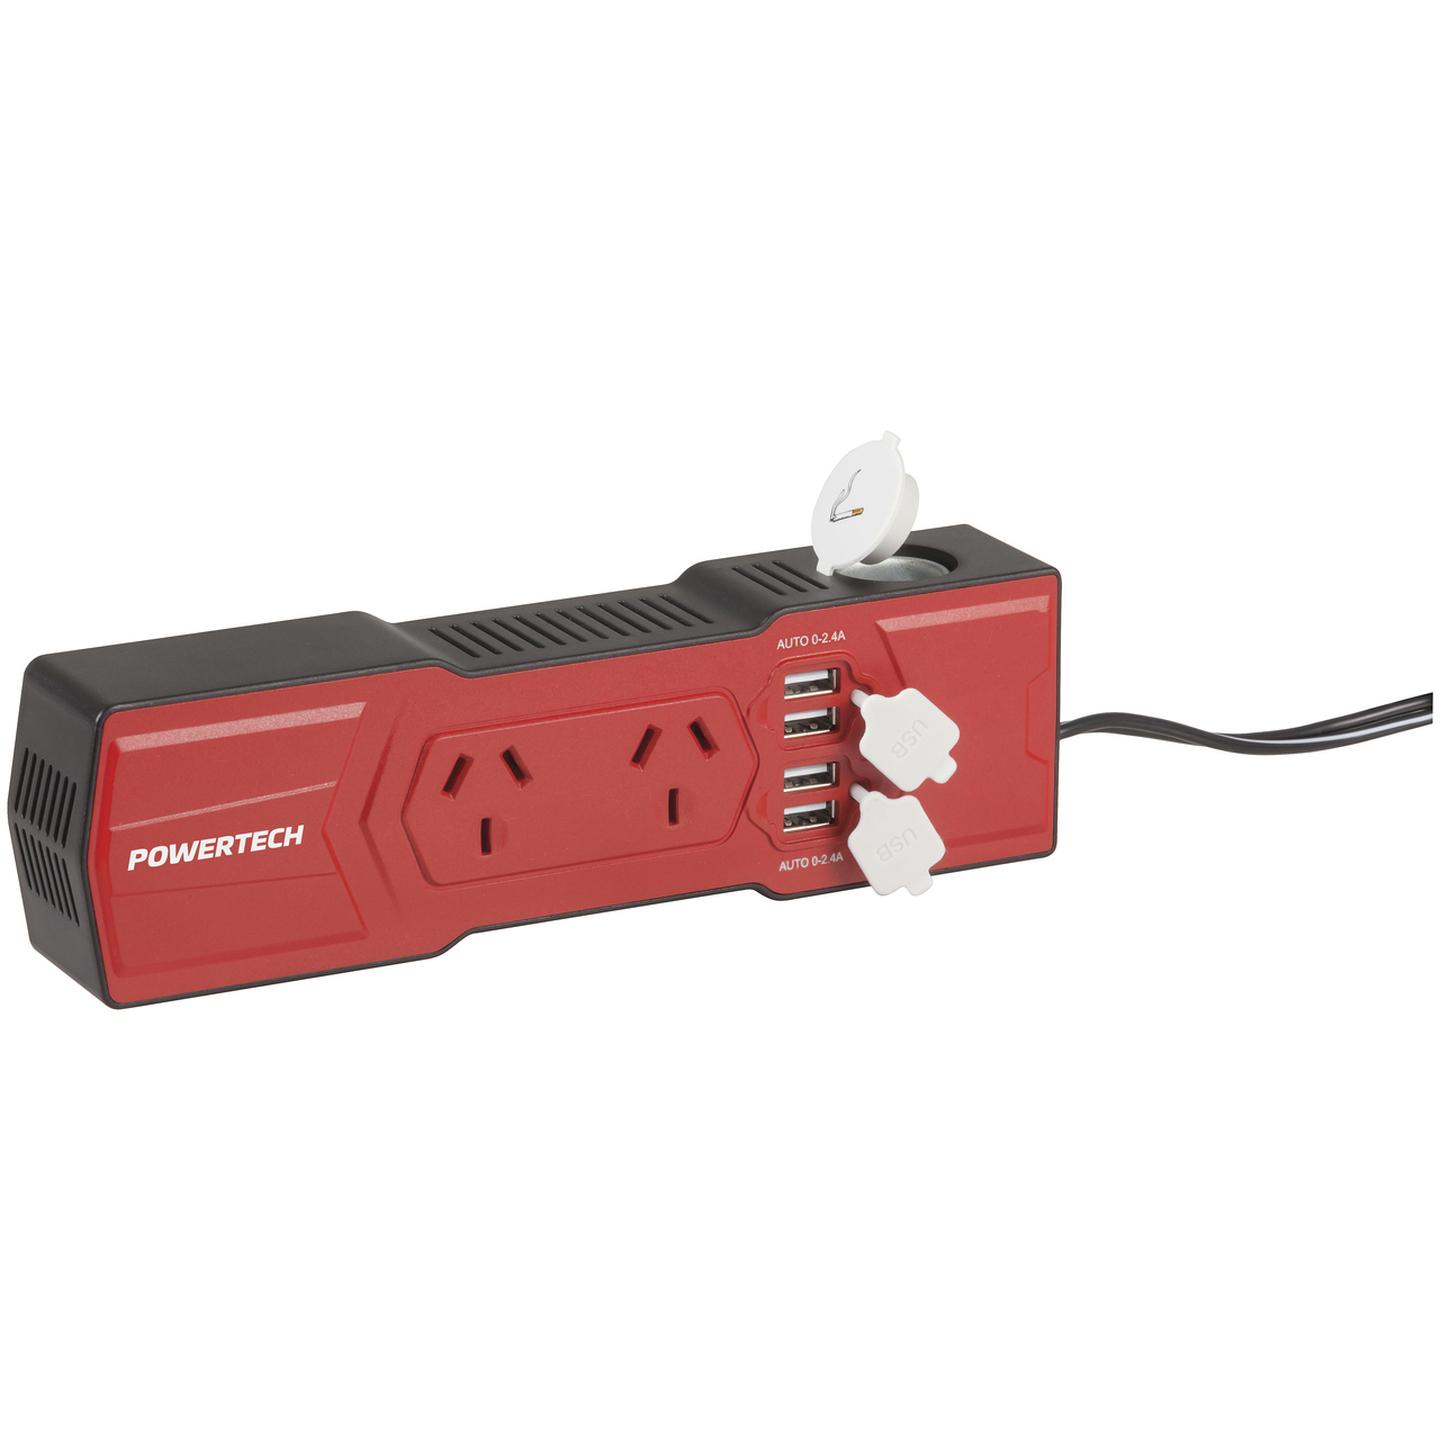 200W Inverter with 4 USB Outlets